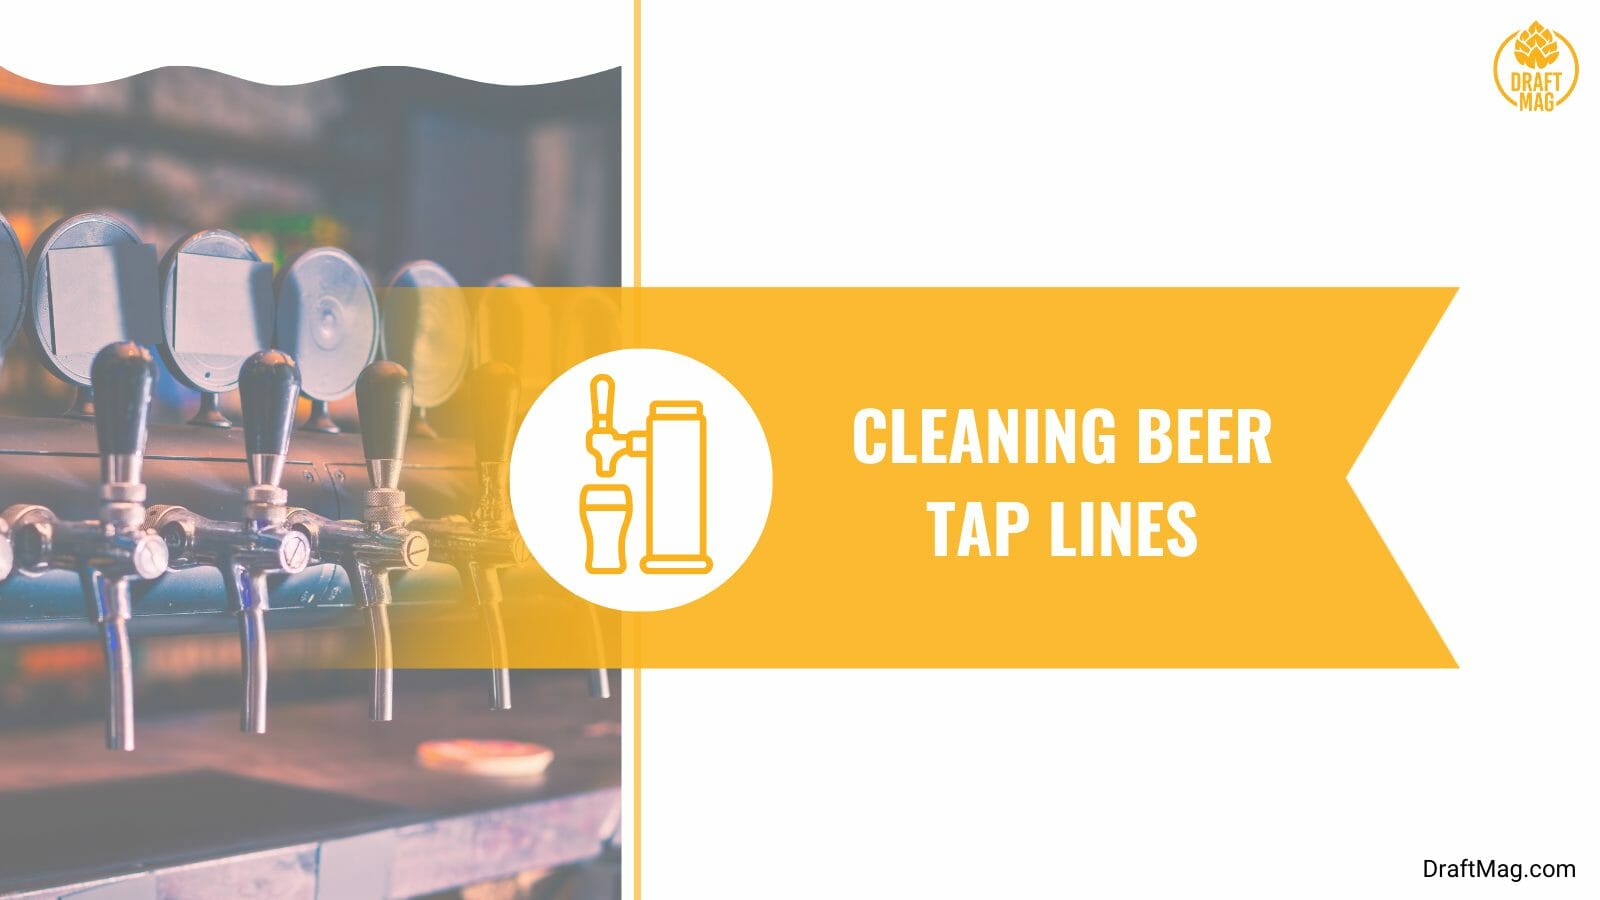 Cleaning beer tap lines